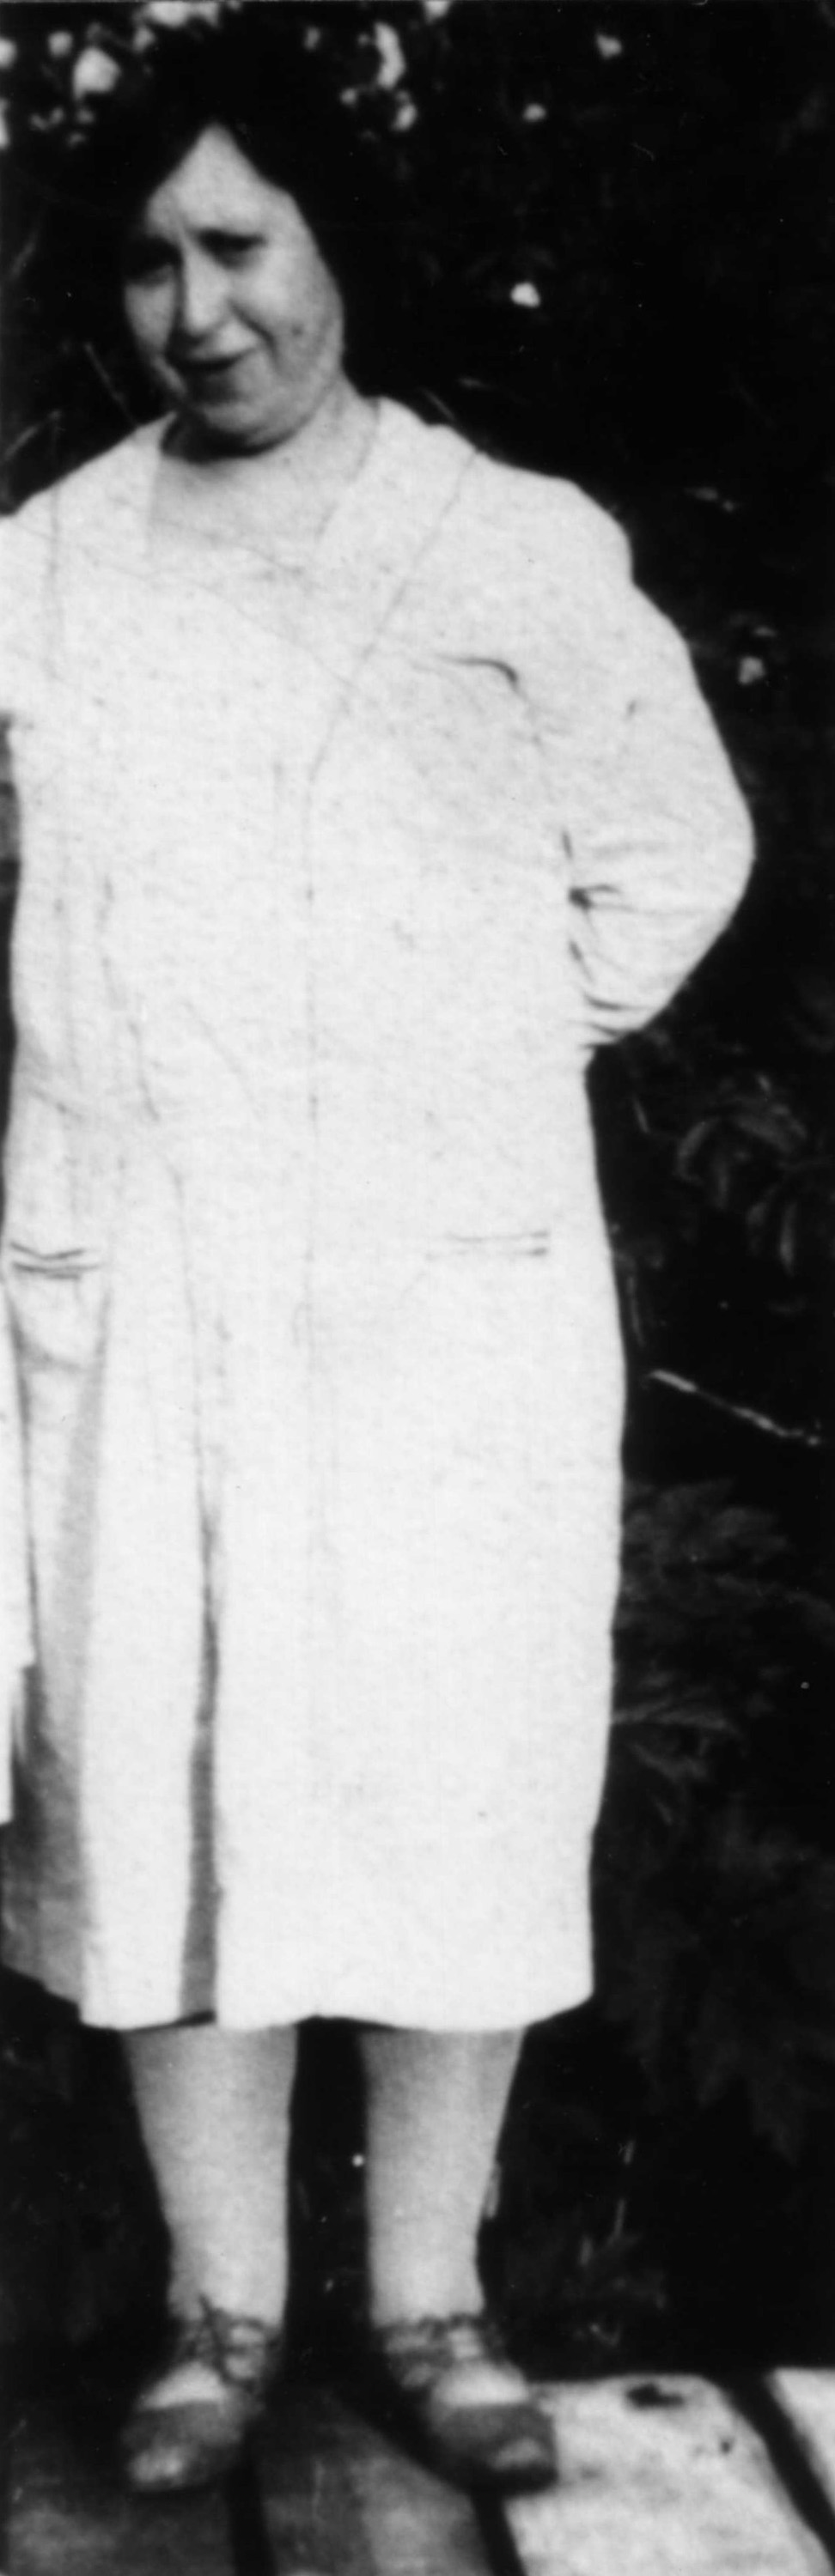 Woman standing wearing a white dress and sandals